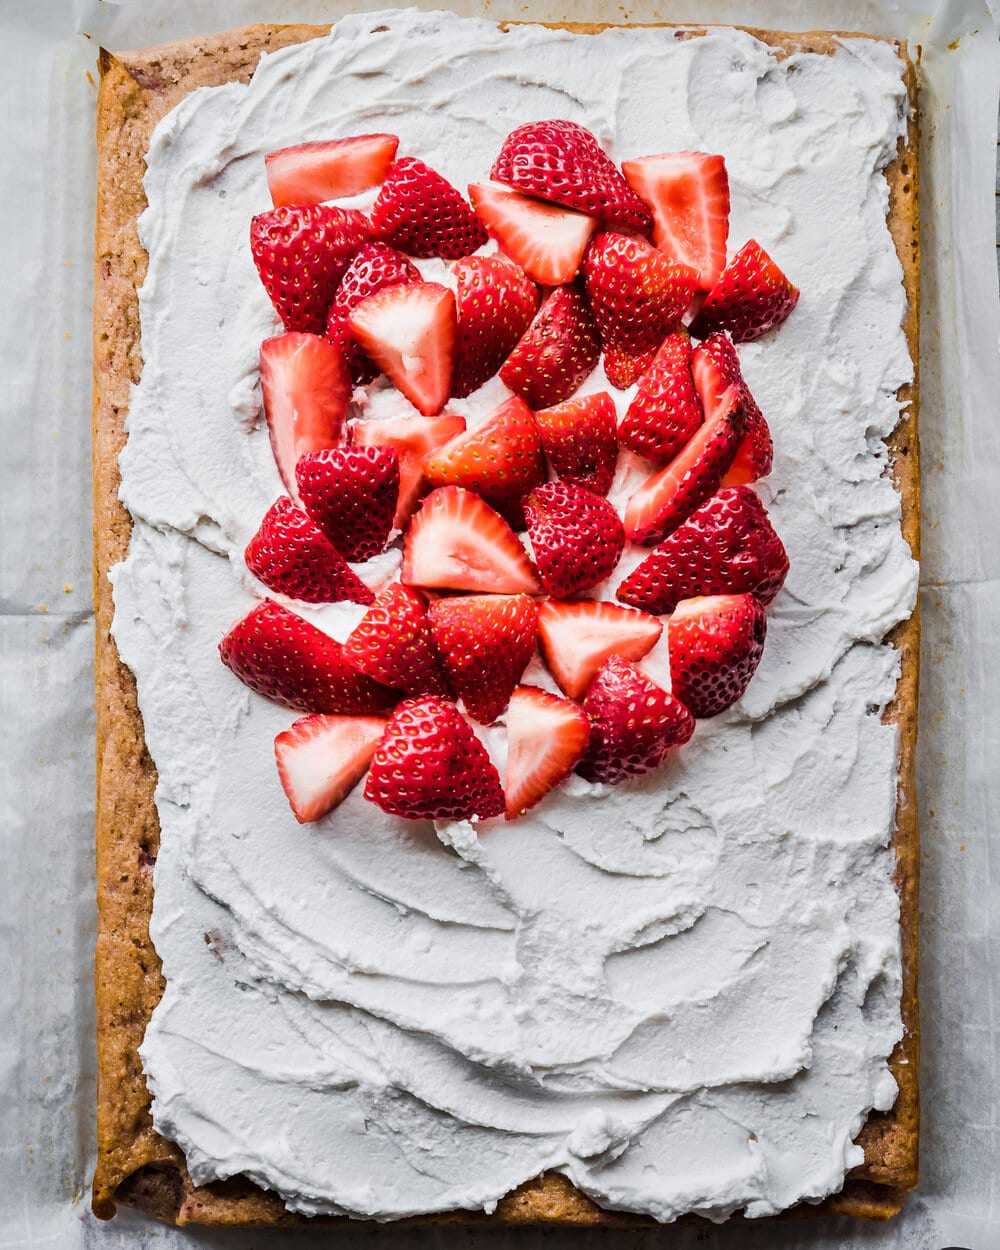 About half of the frosted sheet cake covered with sliced strawberries.